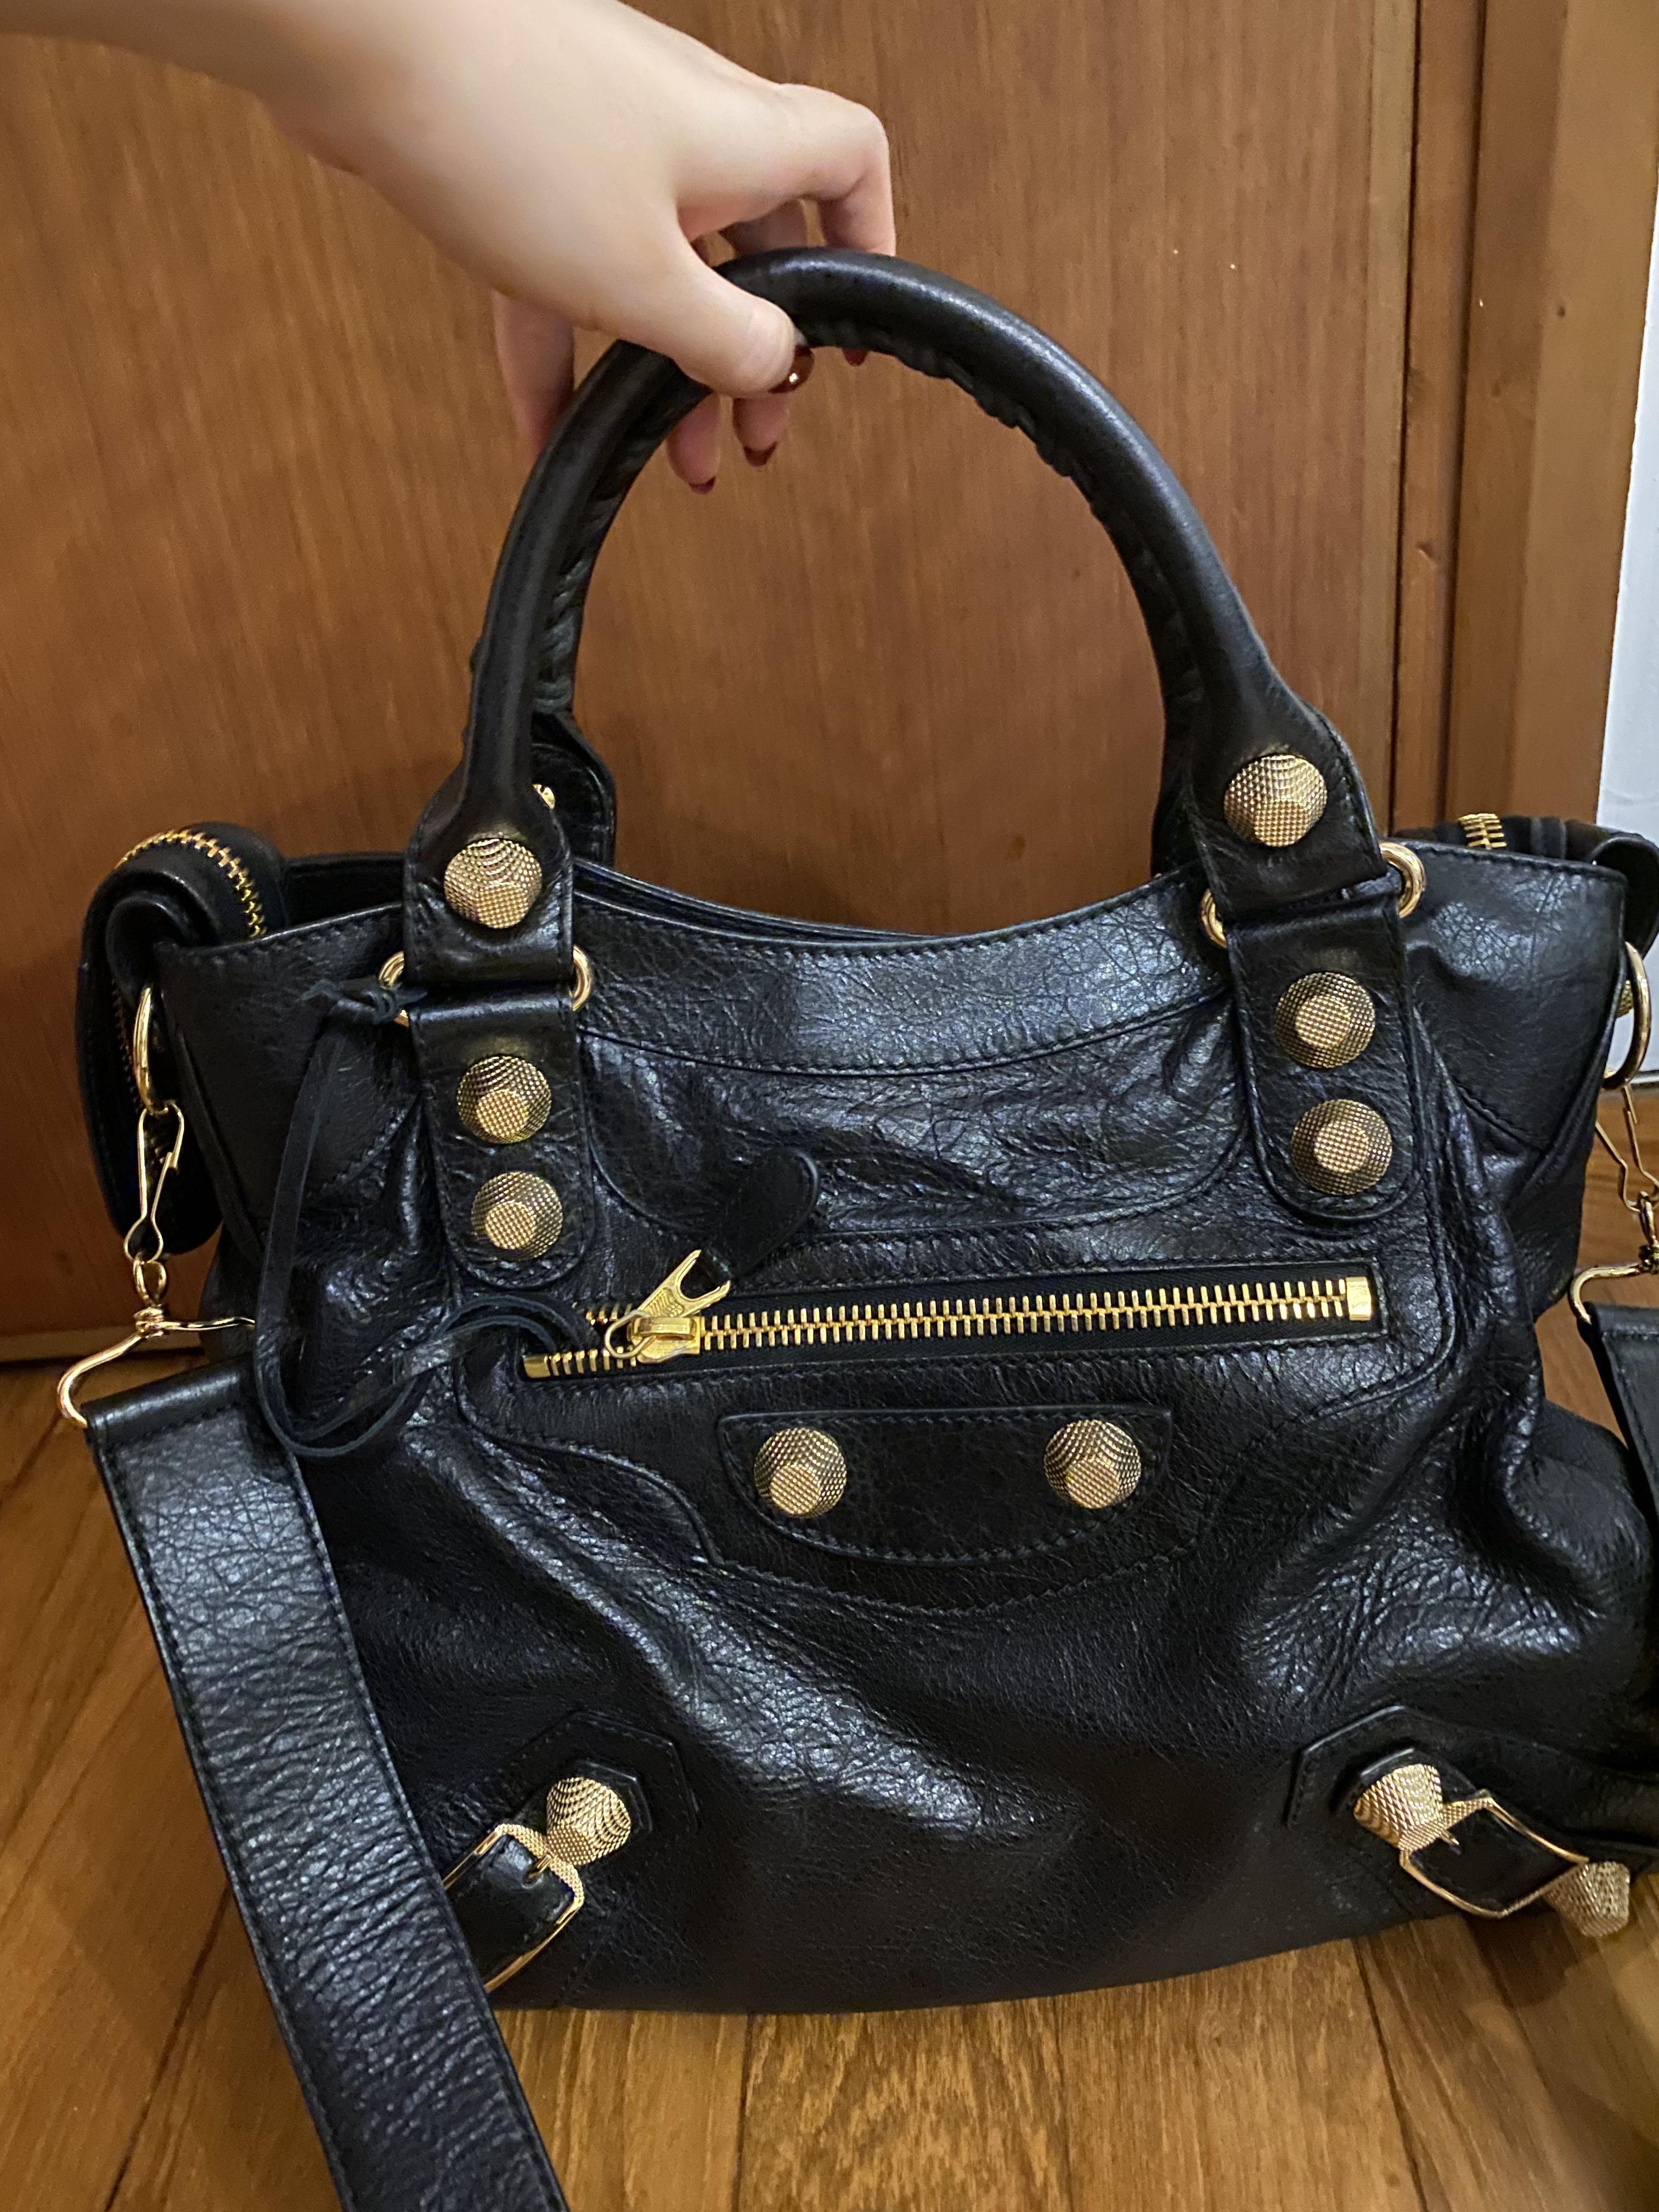 matchmaker brug egoisme Authentic Balenciaga City Bag w Gold Hardware (Big Studs) - Discontinued,  Women's Fashion, Bags & Wallets, Shoulder Bags on Carousell